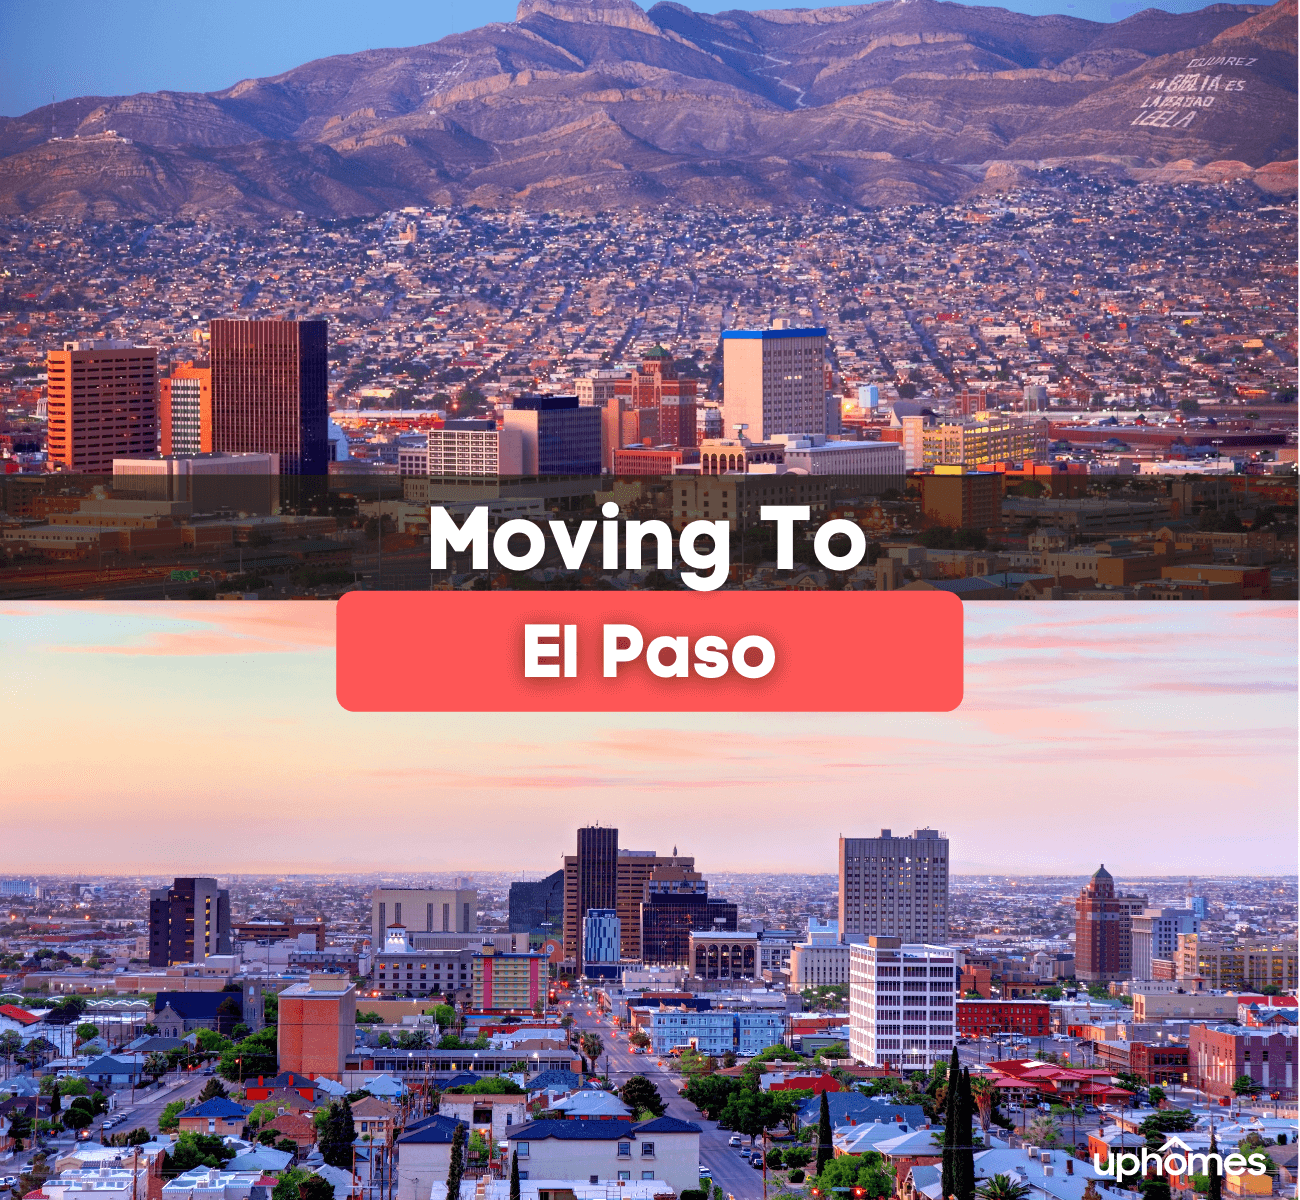 Moving to El Paso TX - What is it like living in El Paso Texas?